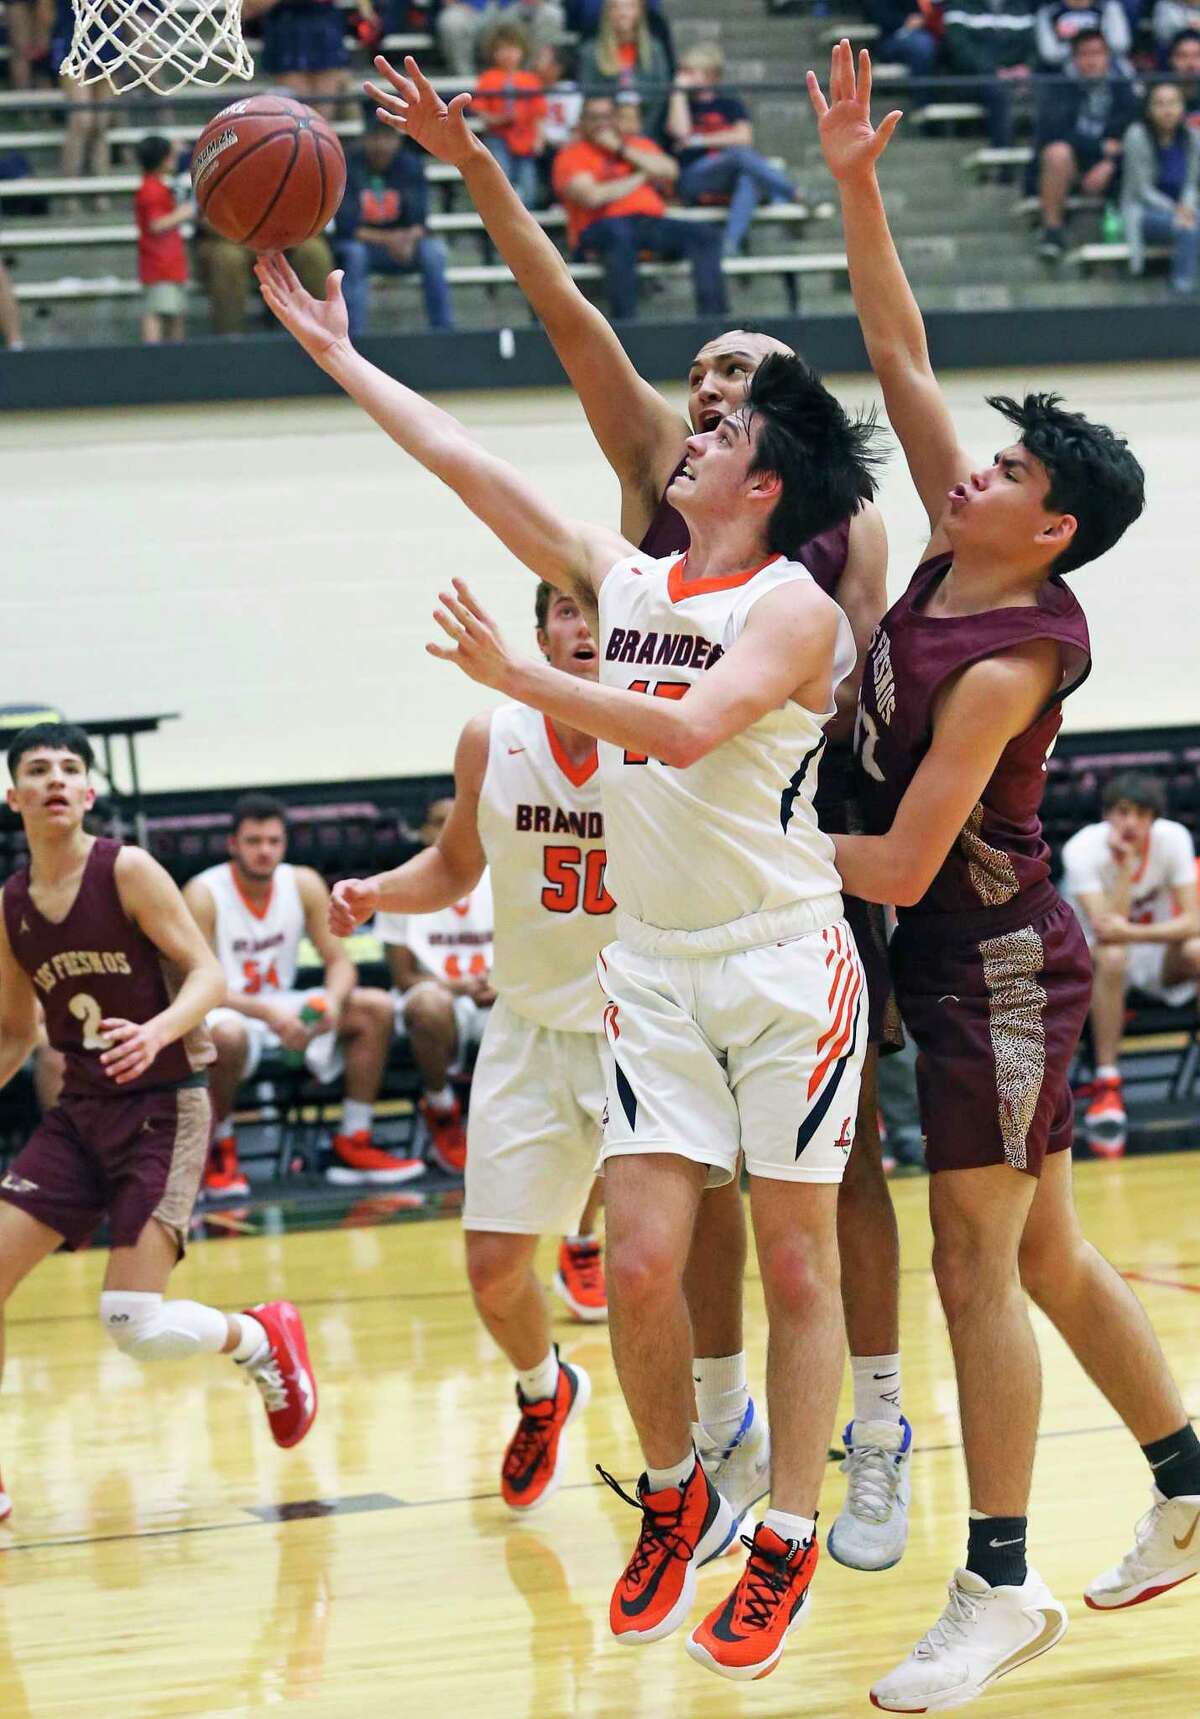 Brandeis guard Andrew Lazinbat gets past defenders for a layup as the Broncos play Los Fresnos on Class 5A regional semifinal basketball at Littleton Gym on Feb. 6, 2020.